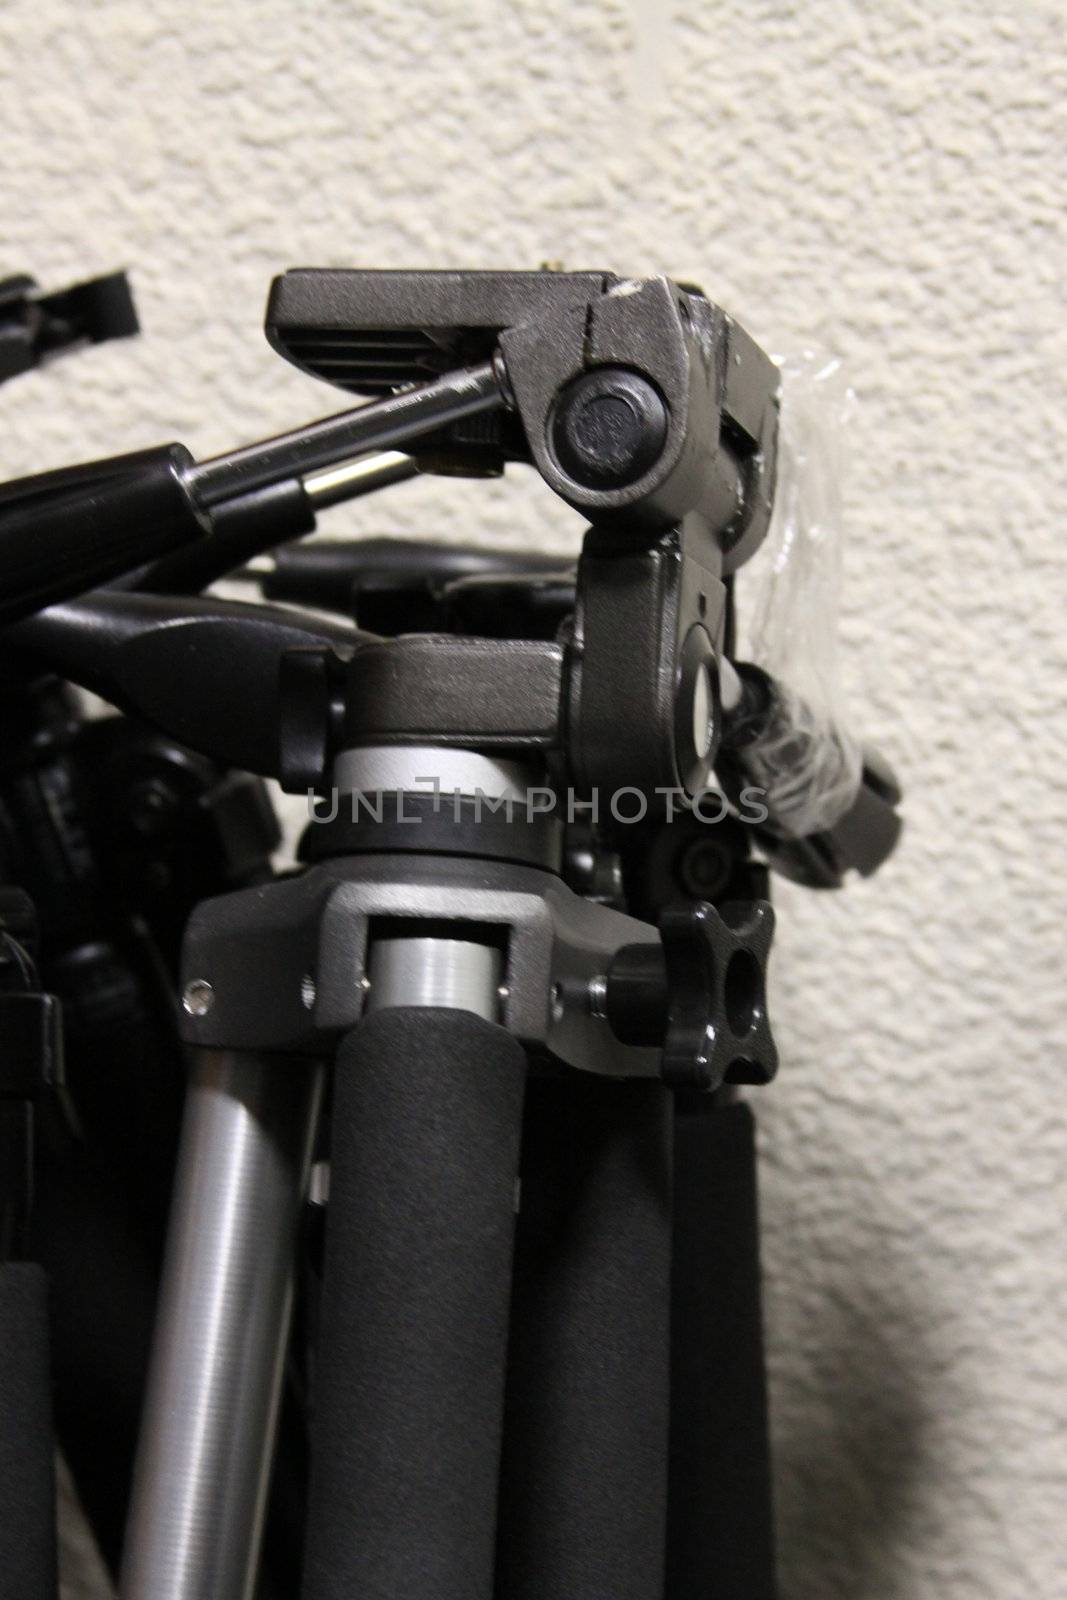 Close up of the group of tripods.